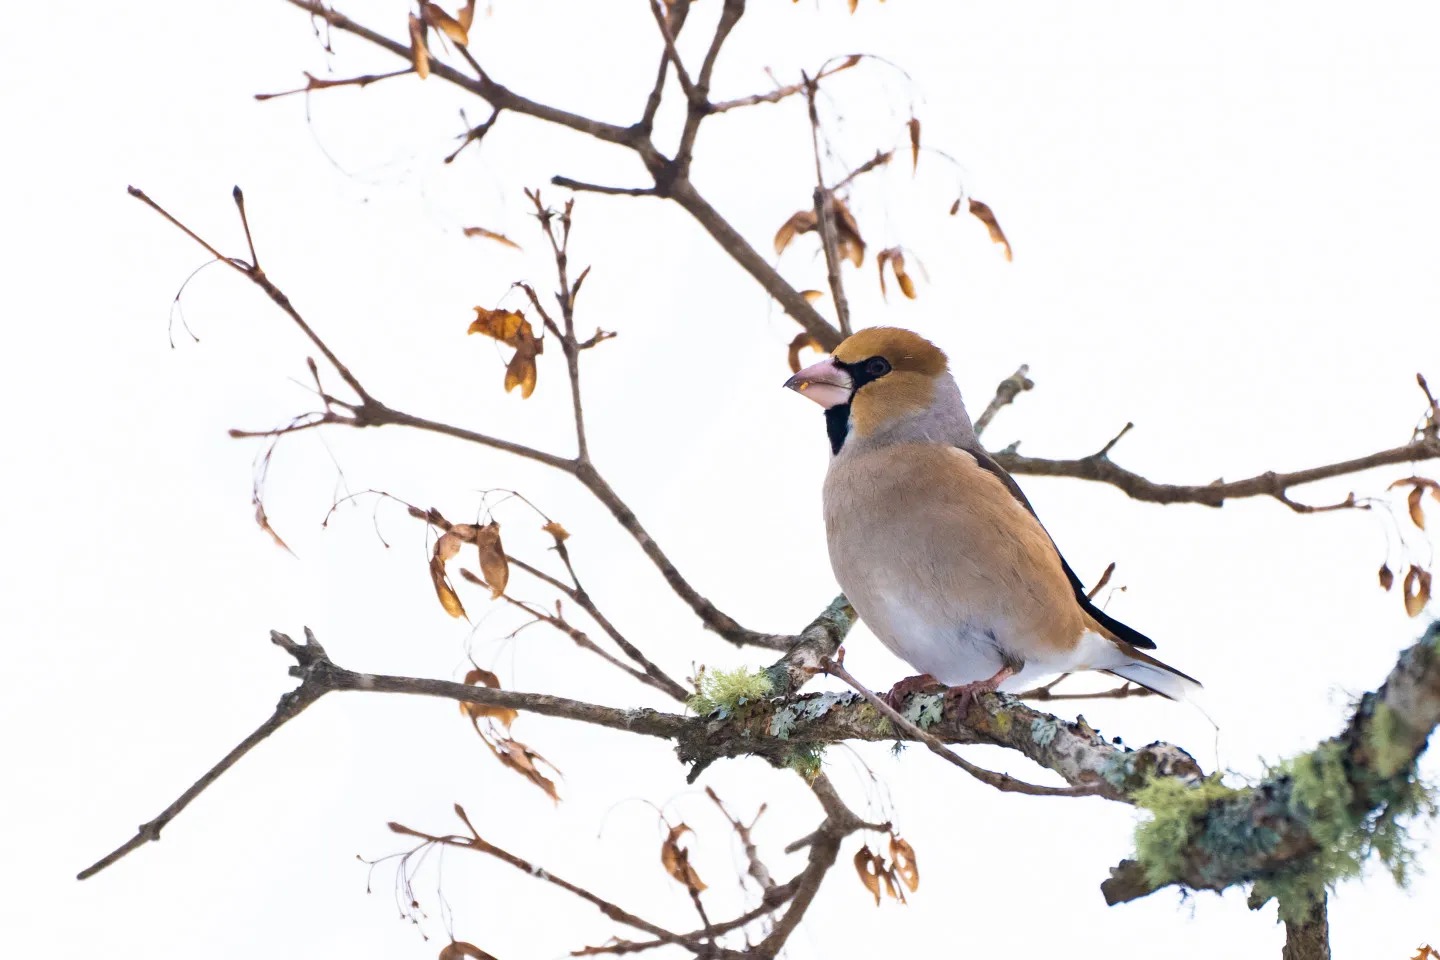 Hawfinch (found in winter) (this photo was taken in January)